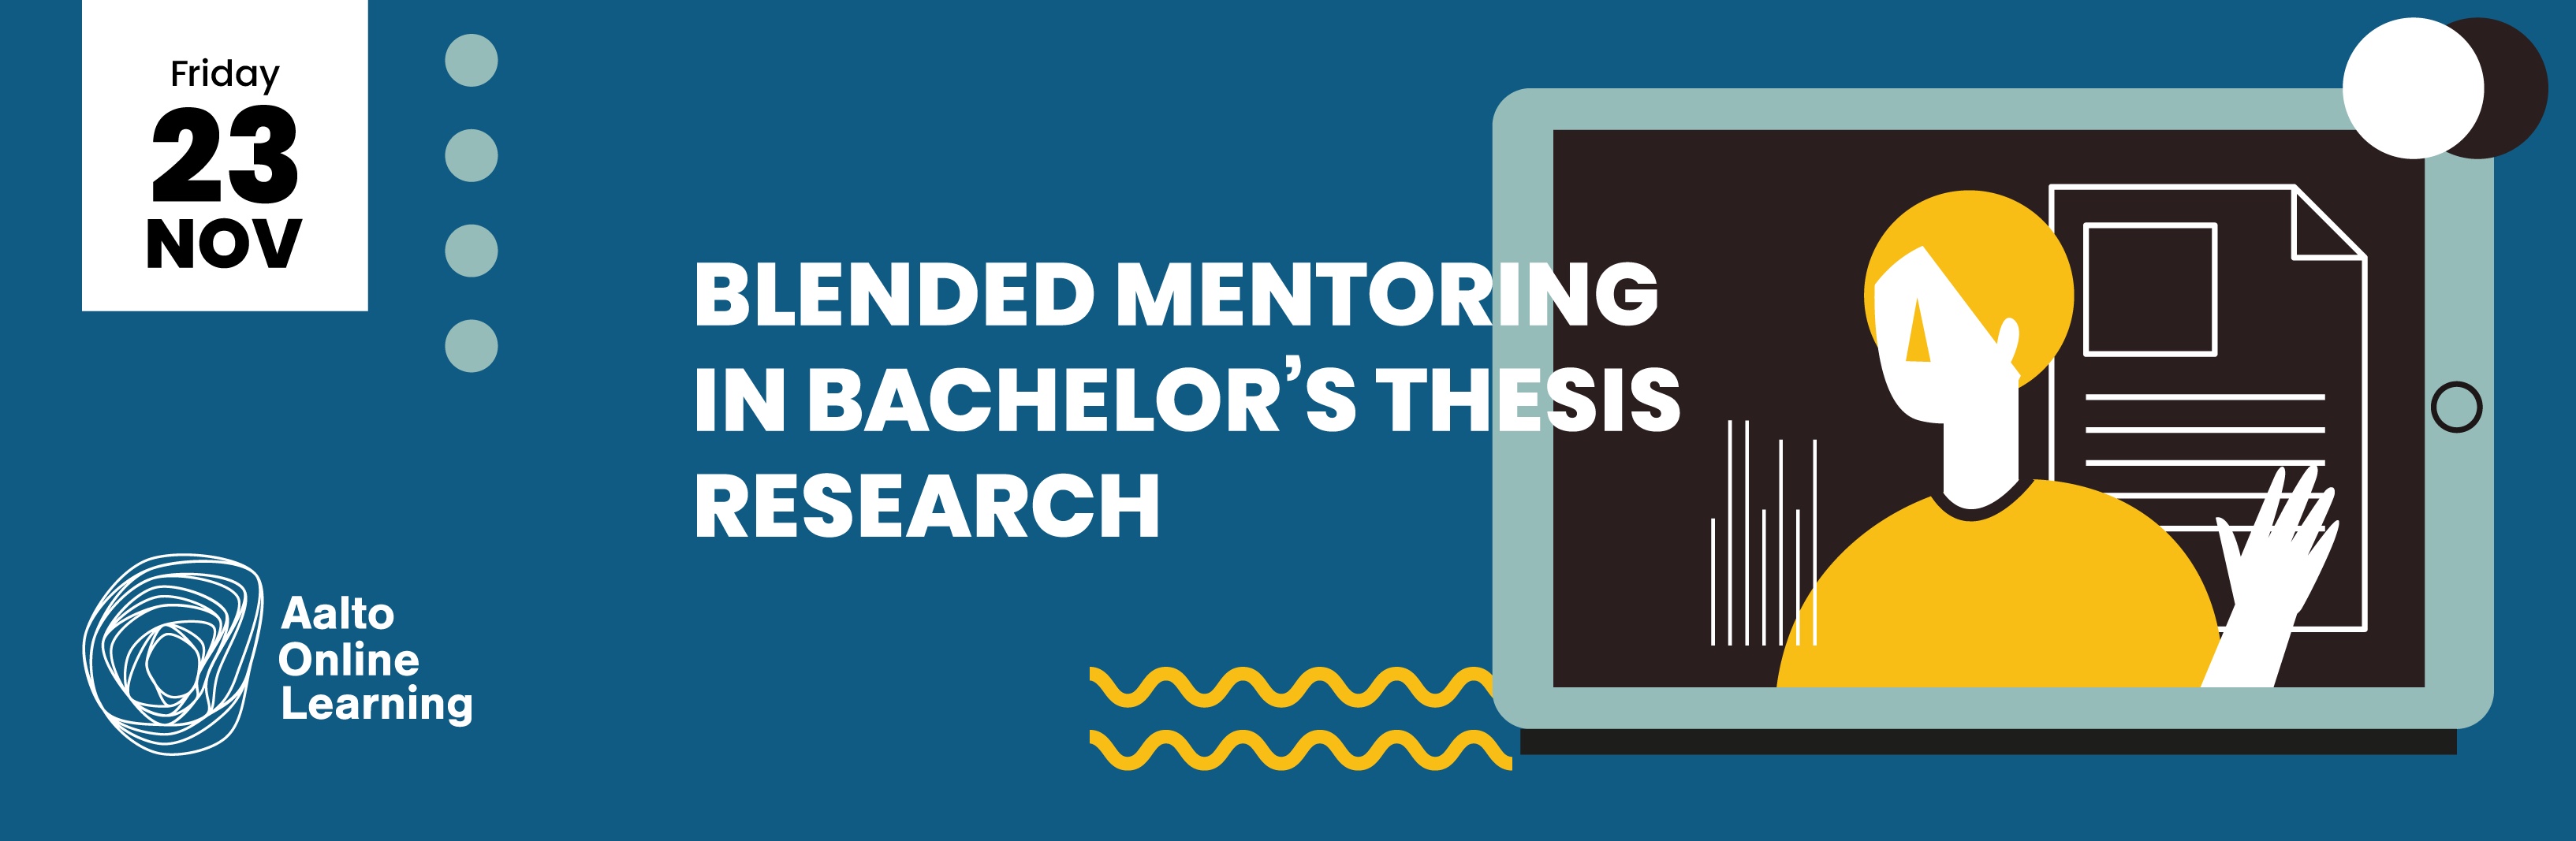 Blended Mentoring in Bachelor’s Thesis Research